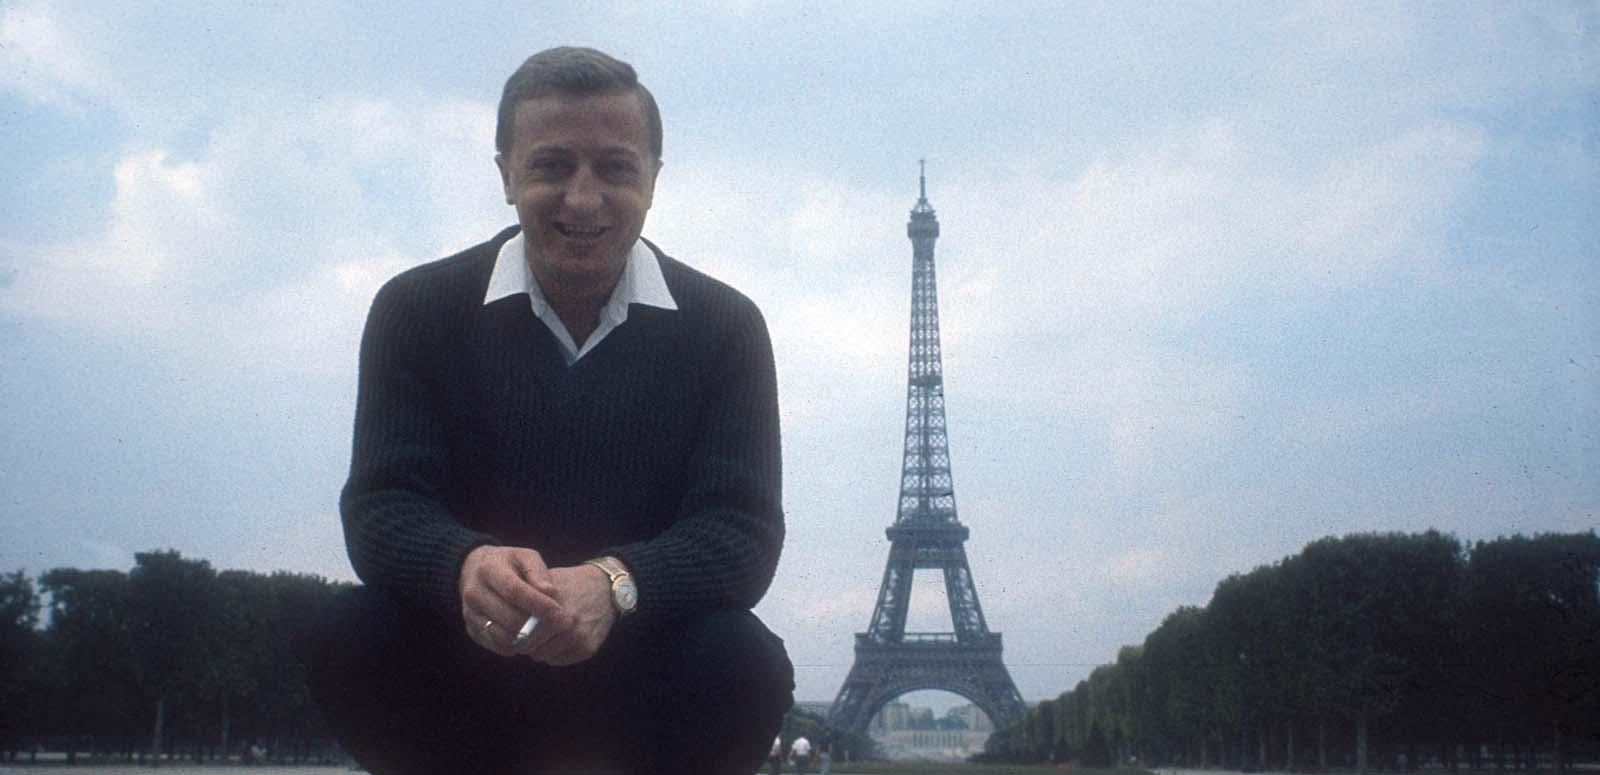 Graham Kennedy poses for the camera in Paris with the Eiffel Tower in the background